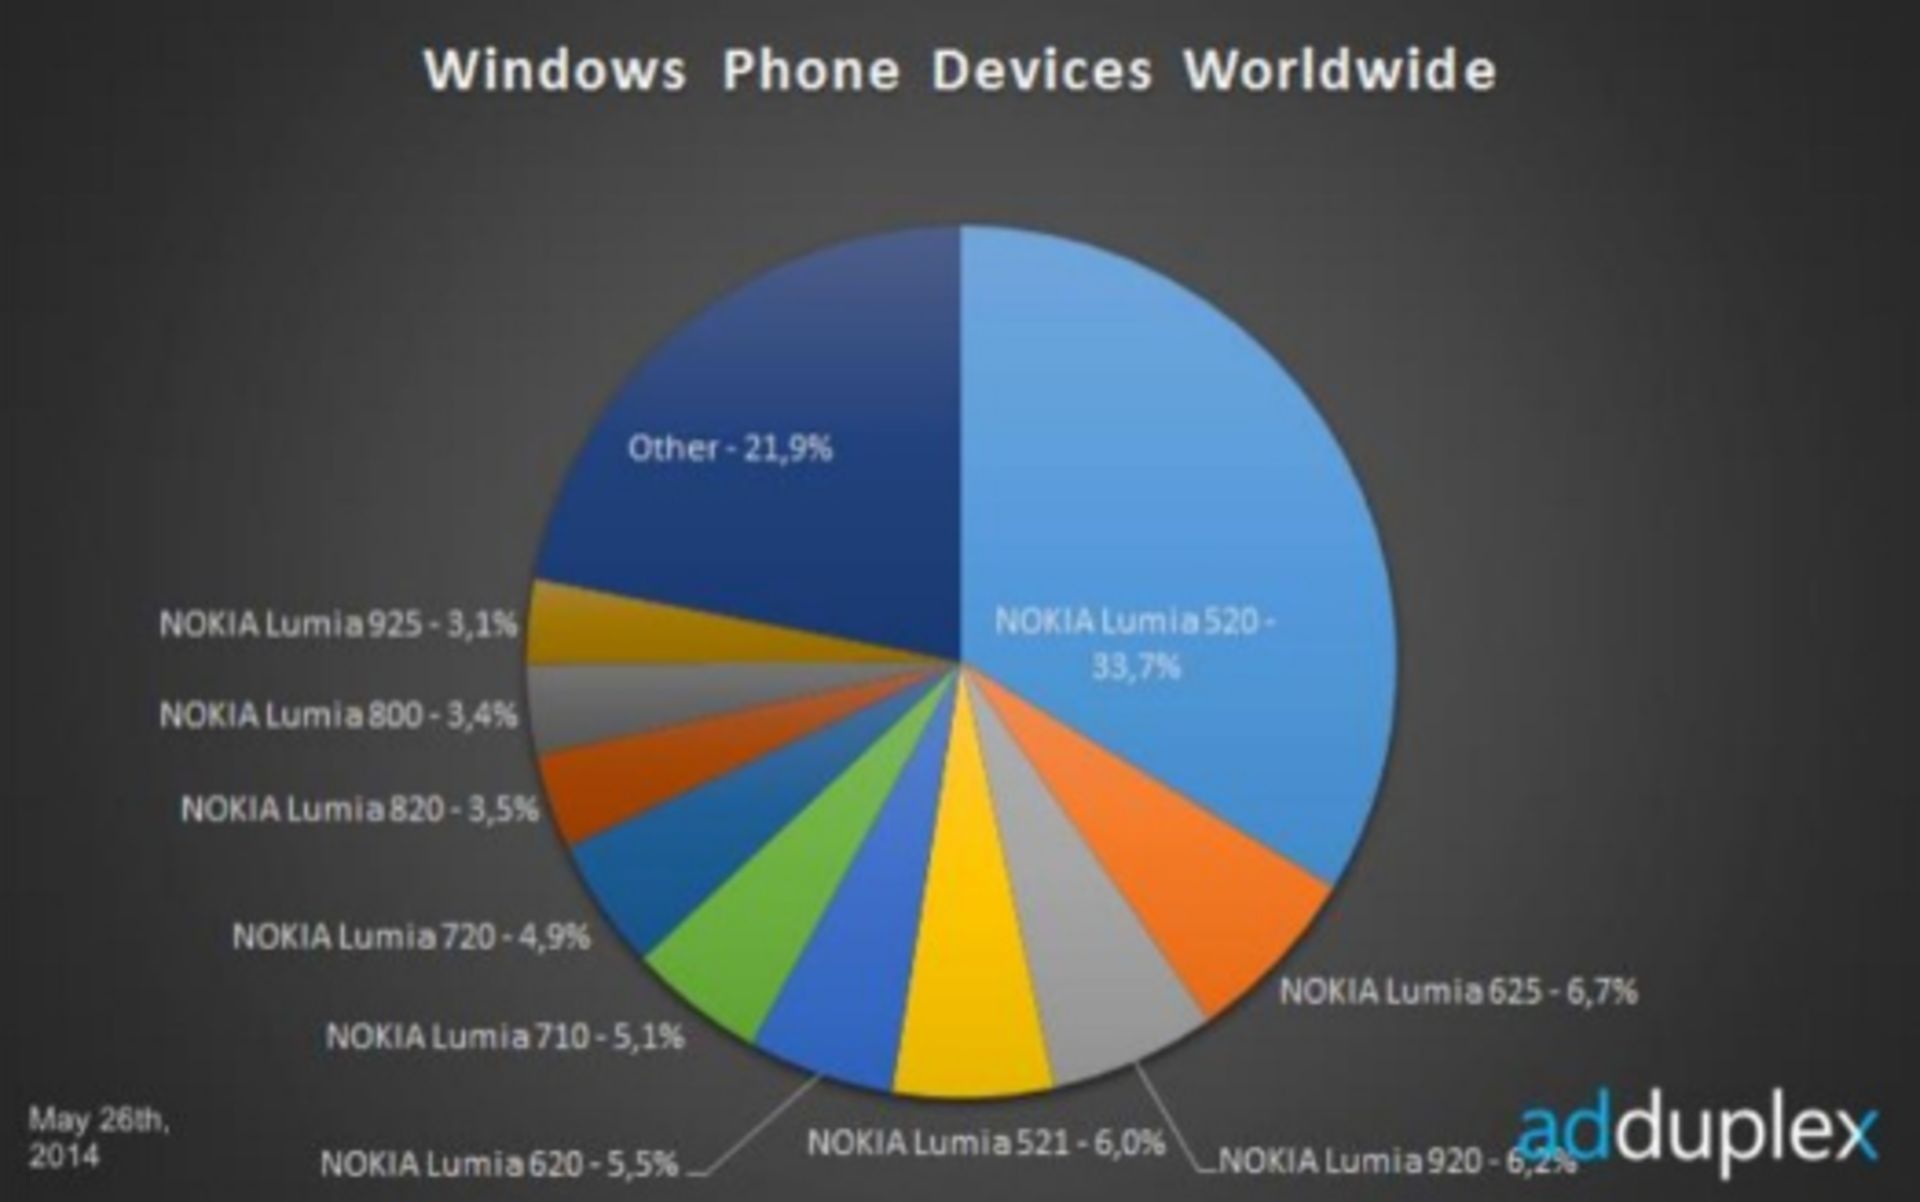 The-Nokia-Lumia-520-remains-the-most-popular-Windows-Phone-model